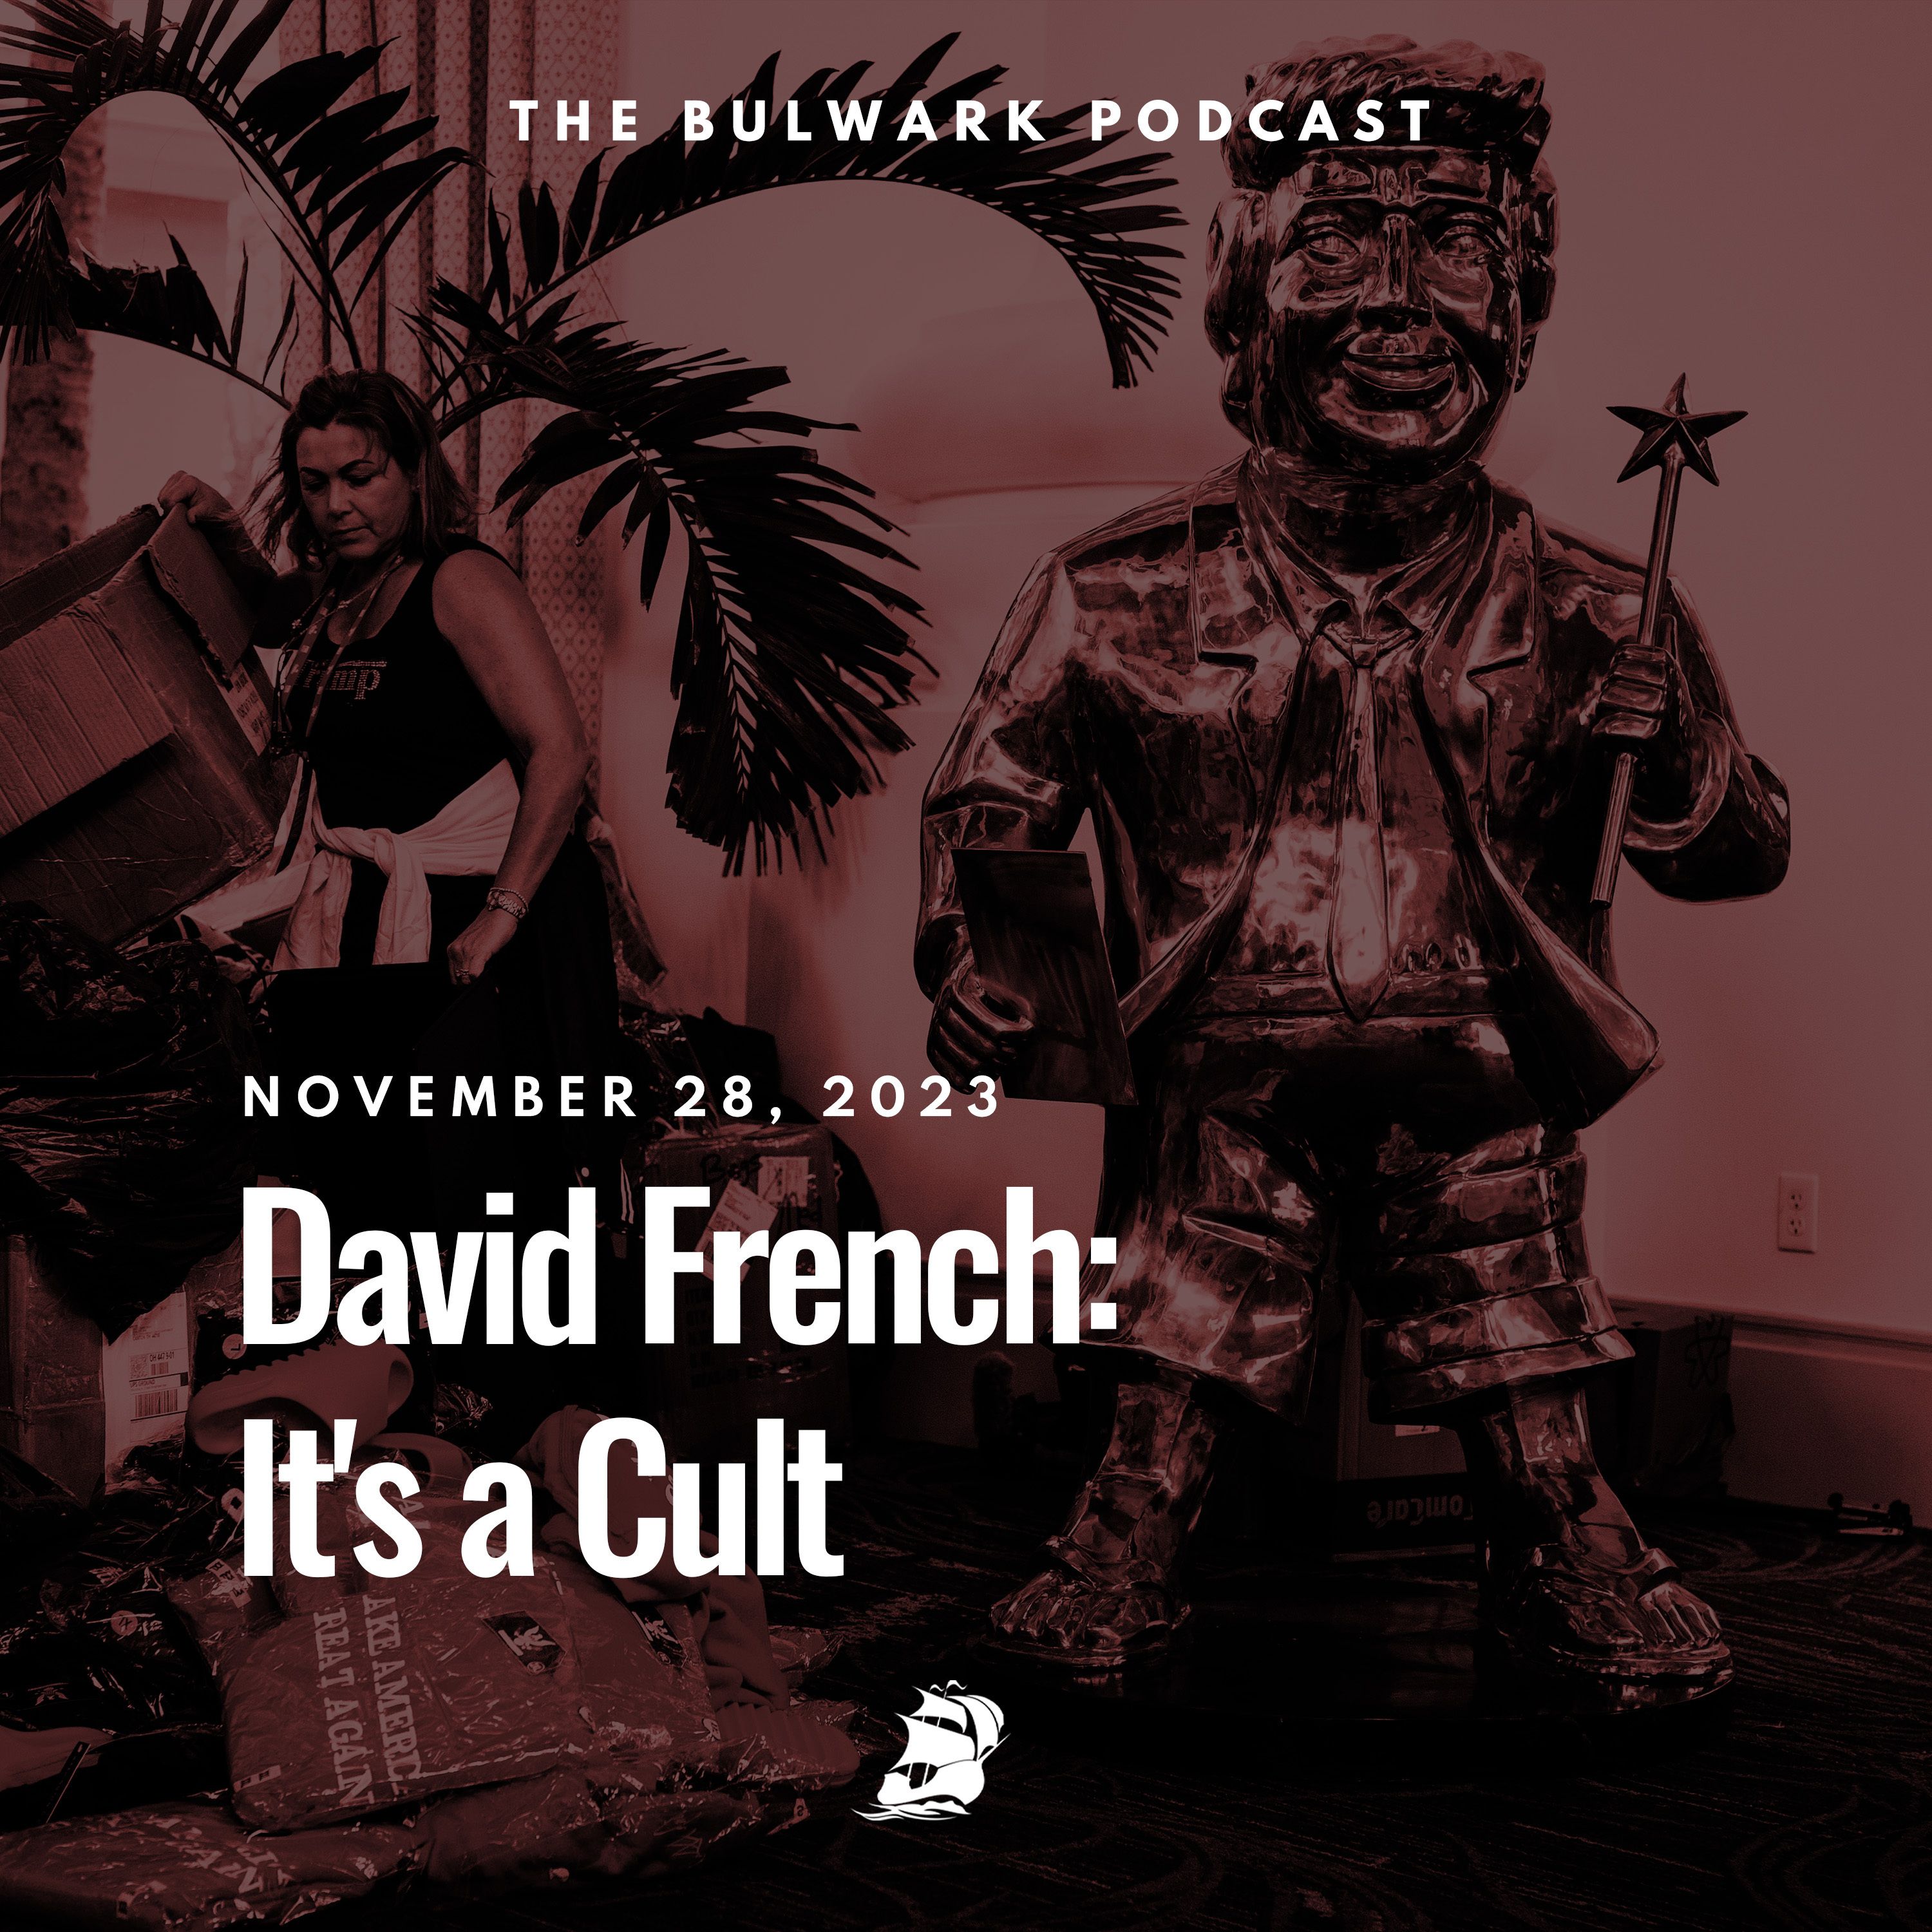 David French: It's a Cult